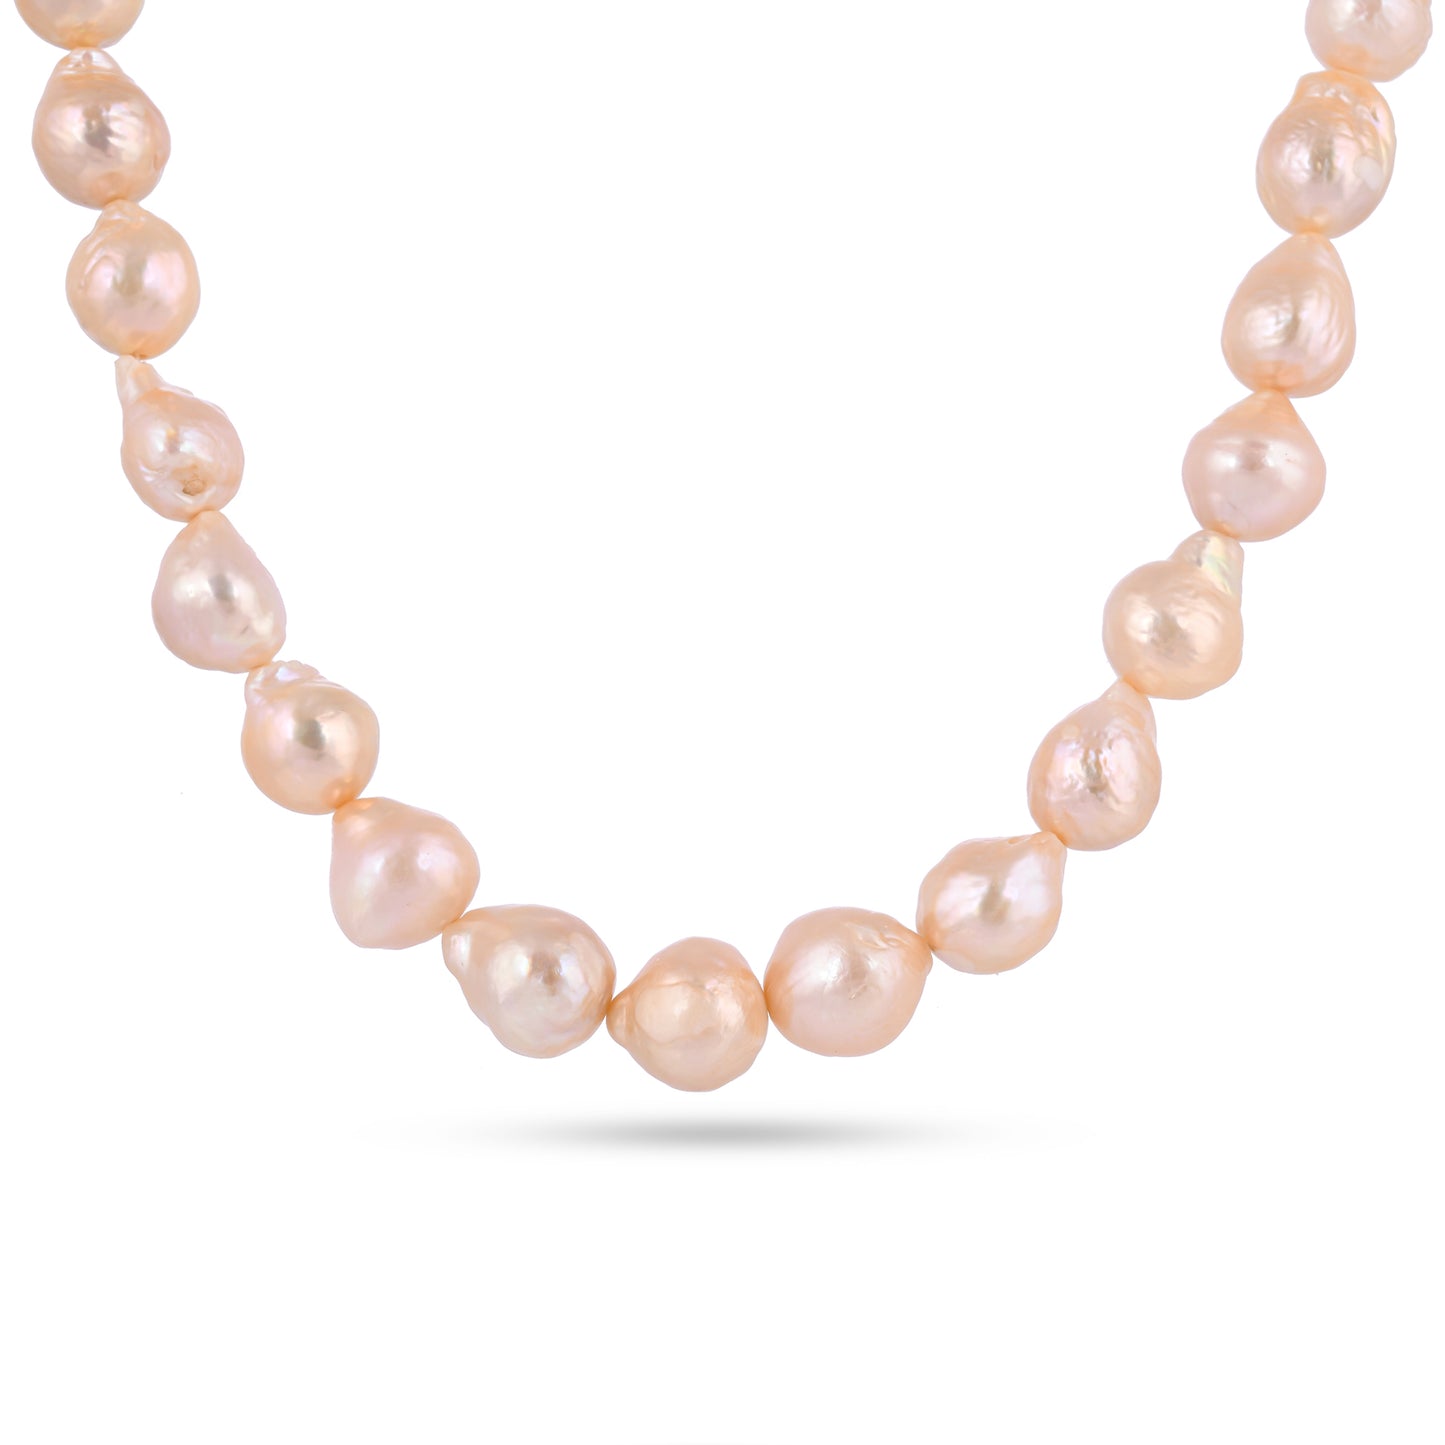 Timeless Natural Pink Baroque Pearl Necklace| 925 Silver - From Purl Purl